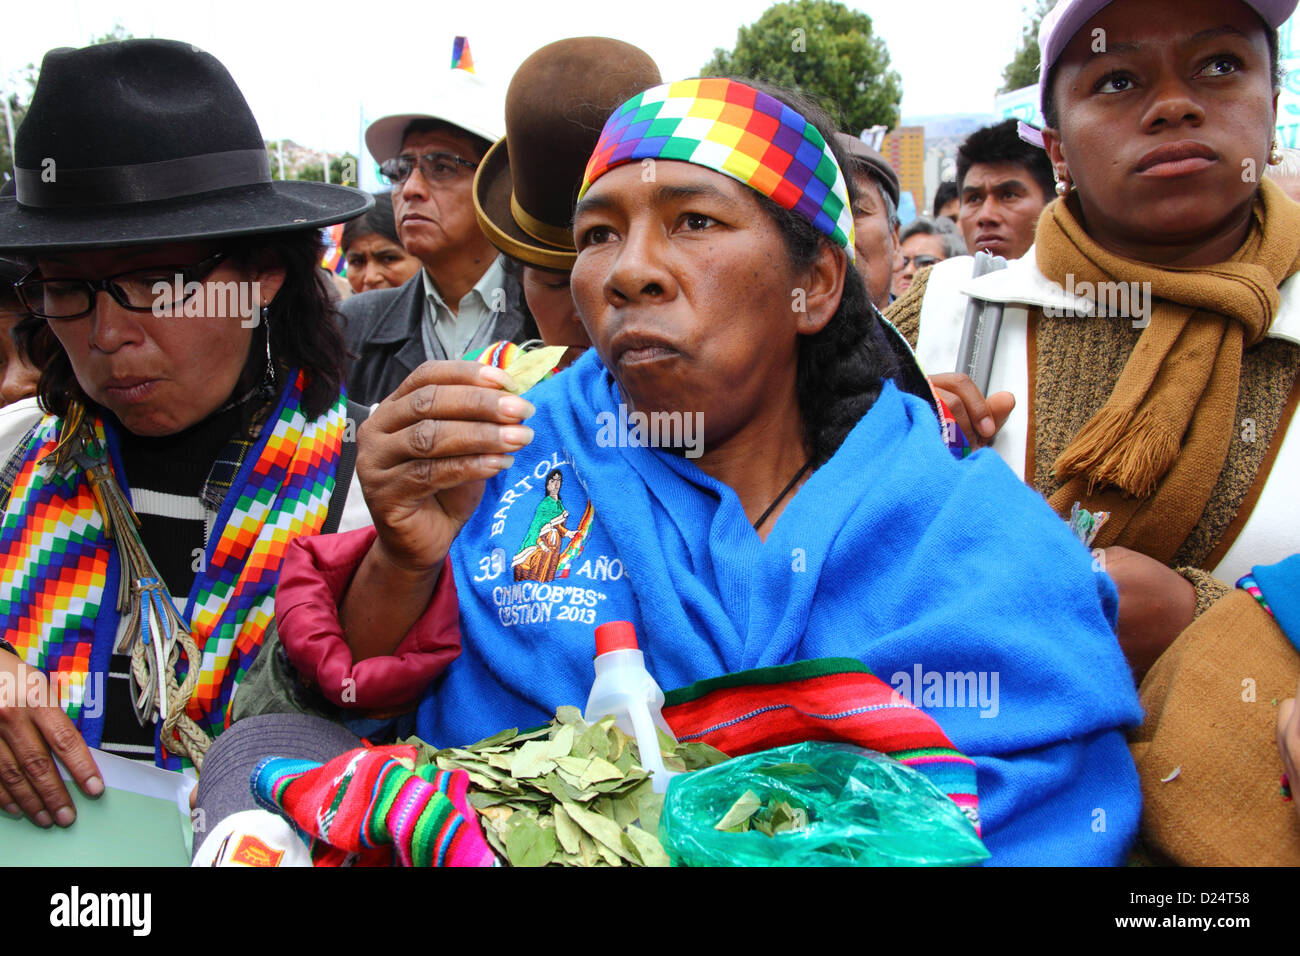 LA PAZ, BOLIVIA, 14th January. An Afro-Bolivian lady from the Yungas region chews coca leaves to celebrate Bolivia rejoining the 1961 UN Single Convention on Narcotic Drugs. Bolivia formally withdrew from the Convention in 2011 and had been campaigning for clauses banning traditional uses of the coca leaf to be removed. By the 11th January 2013 deadline only 15 countries (less than the 62 required to block the proposal) had registered an objection to Bolivia rejoining the Convention with special dispensations. Rejoining will come into effect from 10th February 2013. Stock Photo